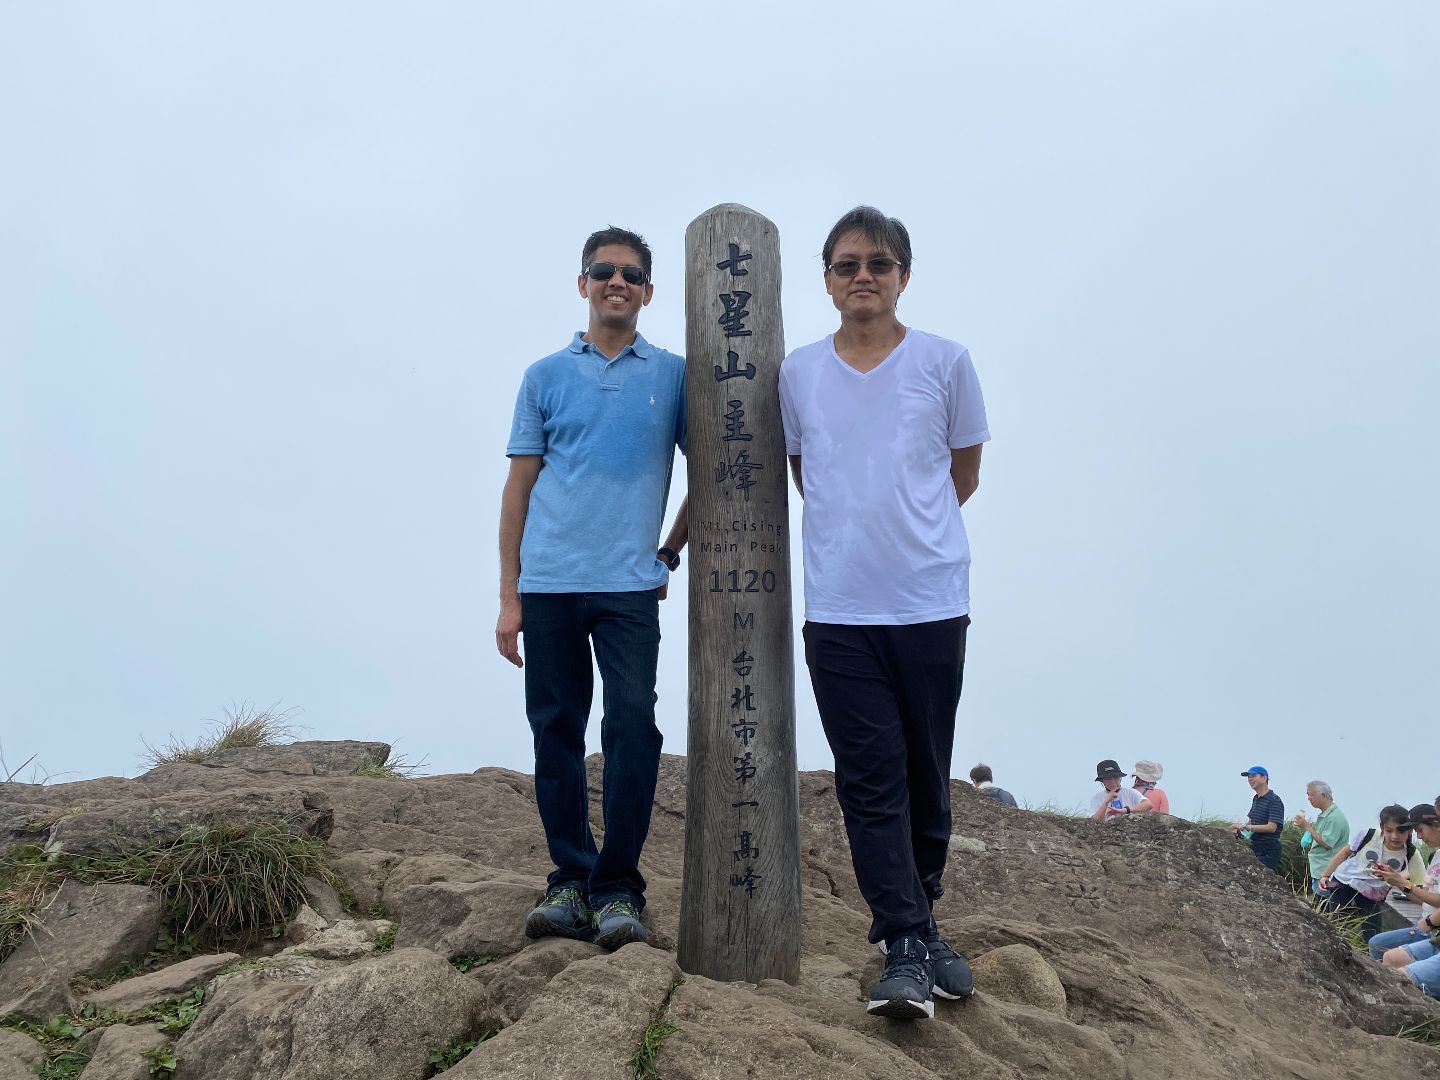 Two men stand on top of a mountain, smiling at the camera with the blue sky behind them. Between them is a tall guide post with writing on it. They are both wearing sunglasses, t-shirts and denim jeans.